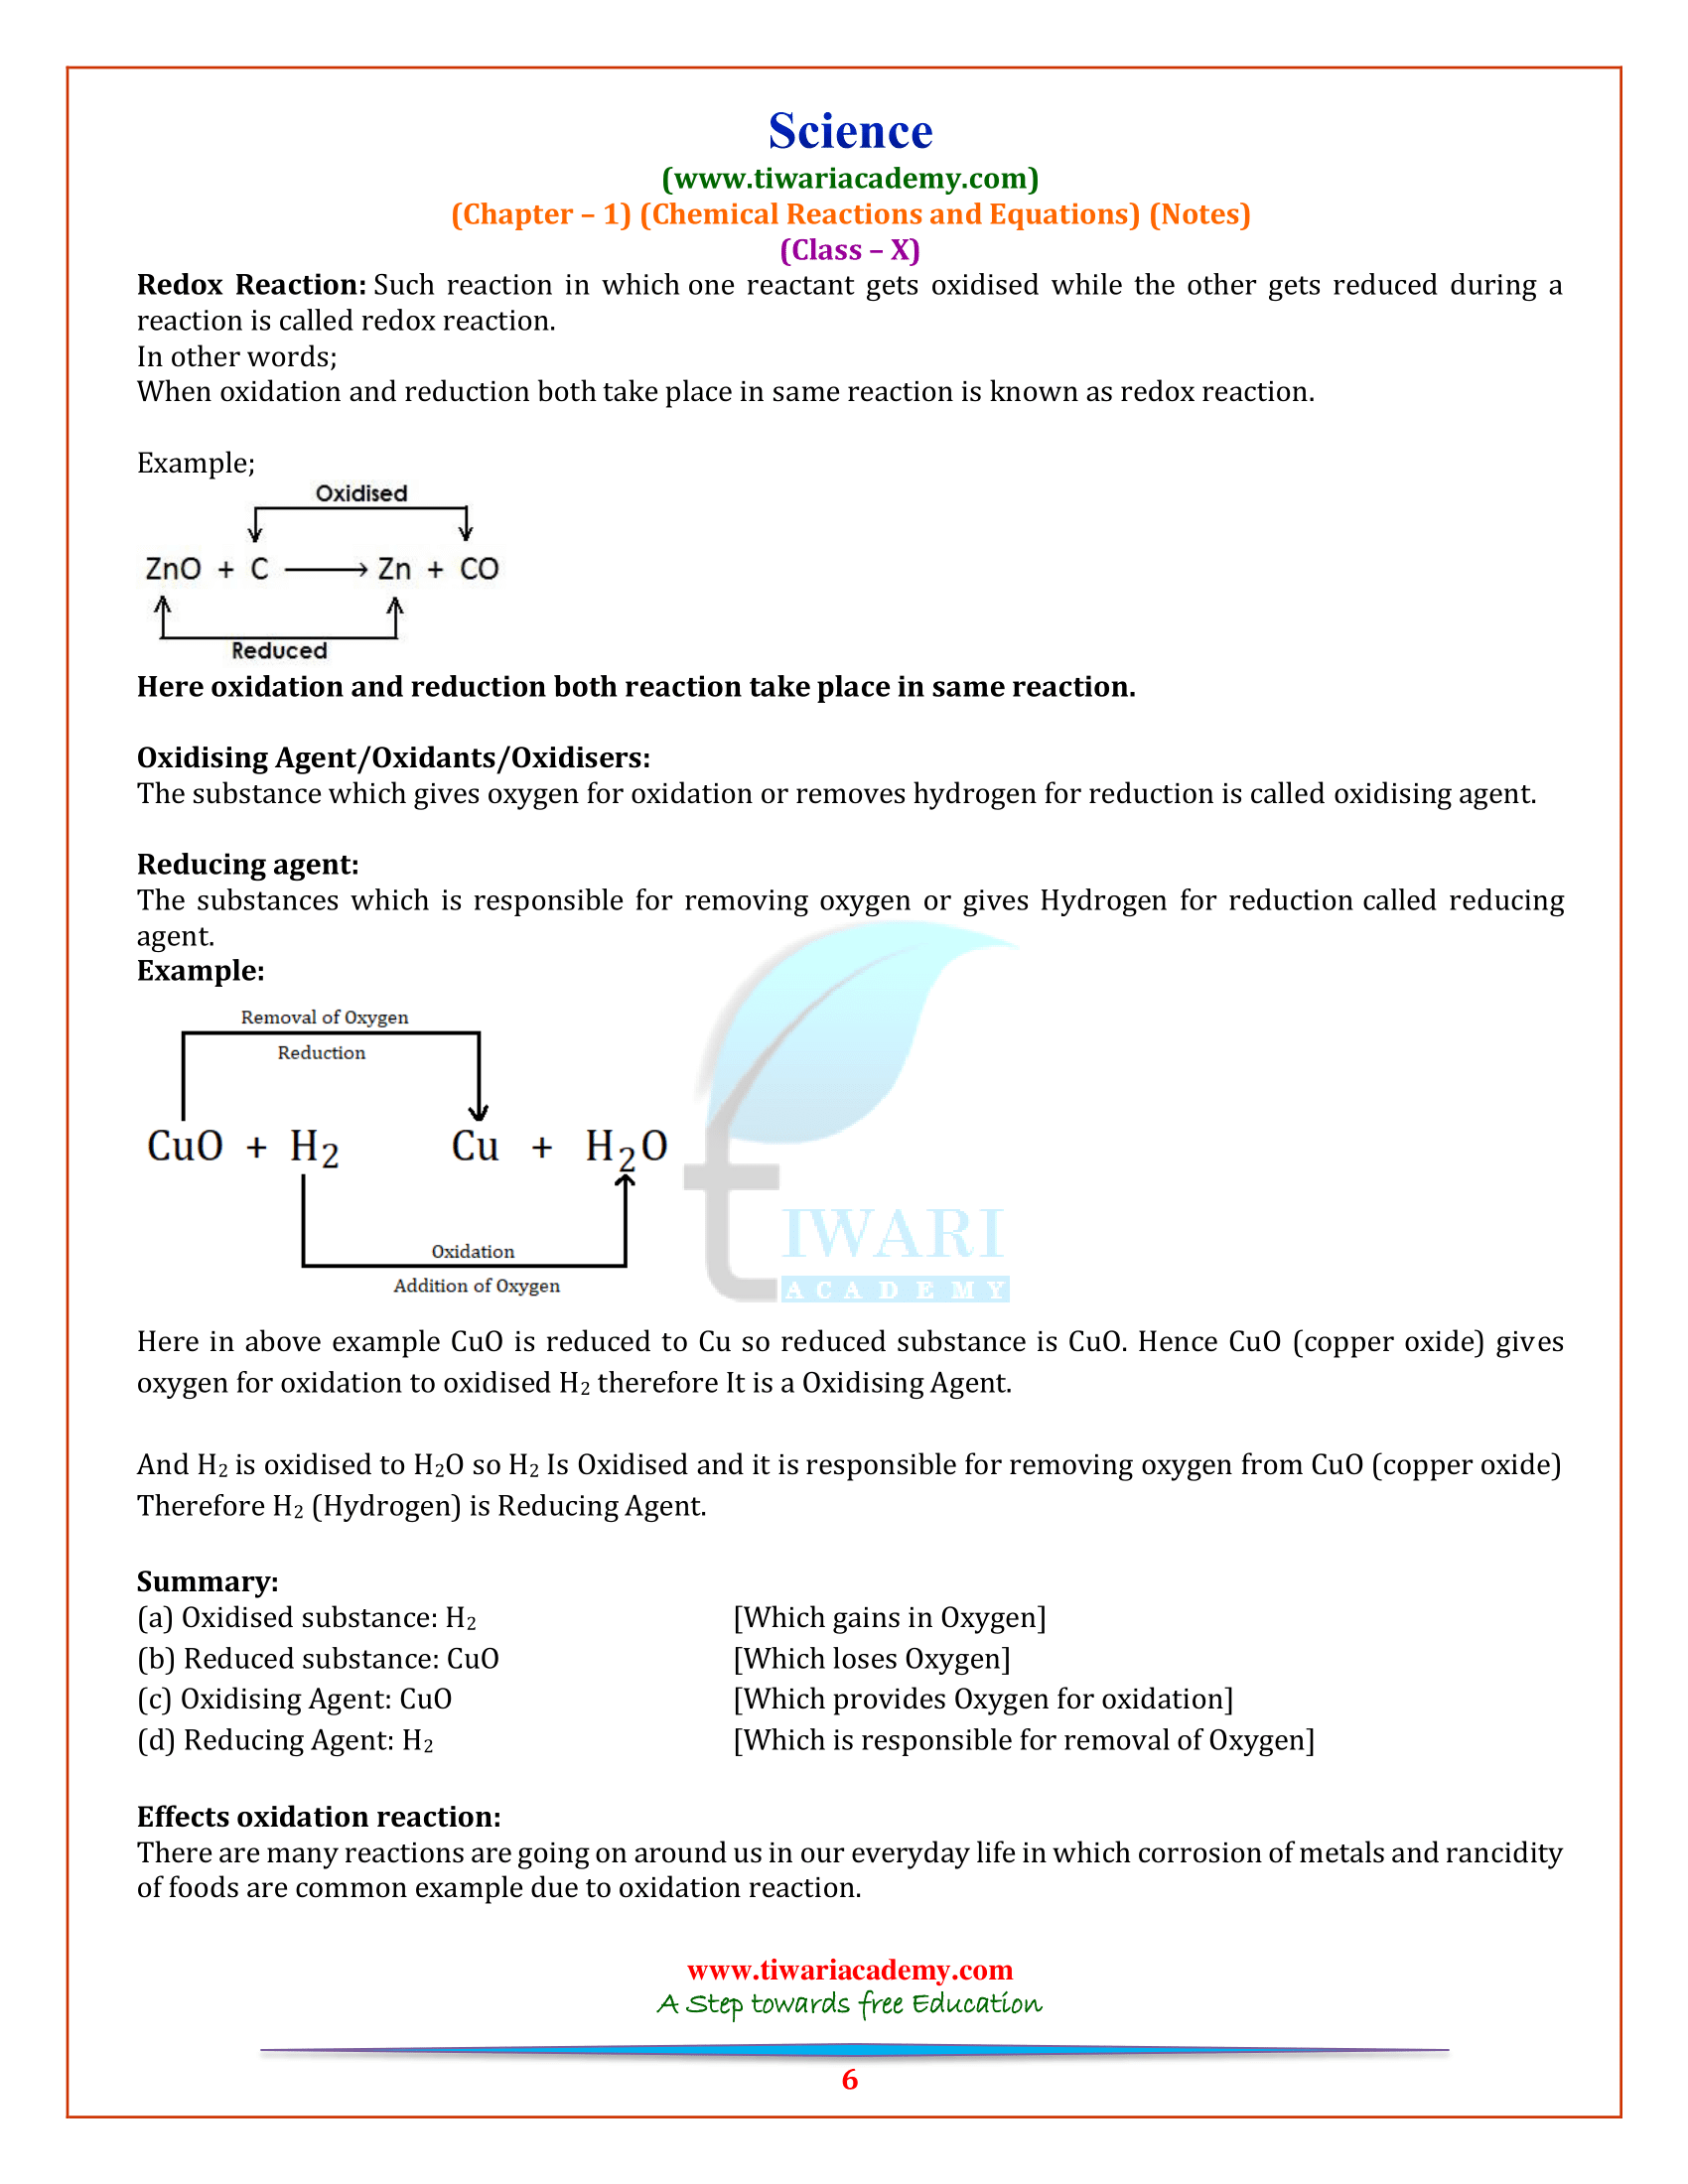 10 Science Chapter 1 Notes in English